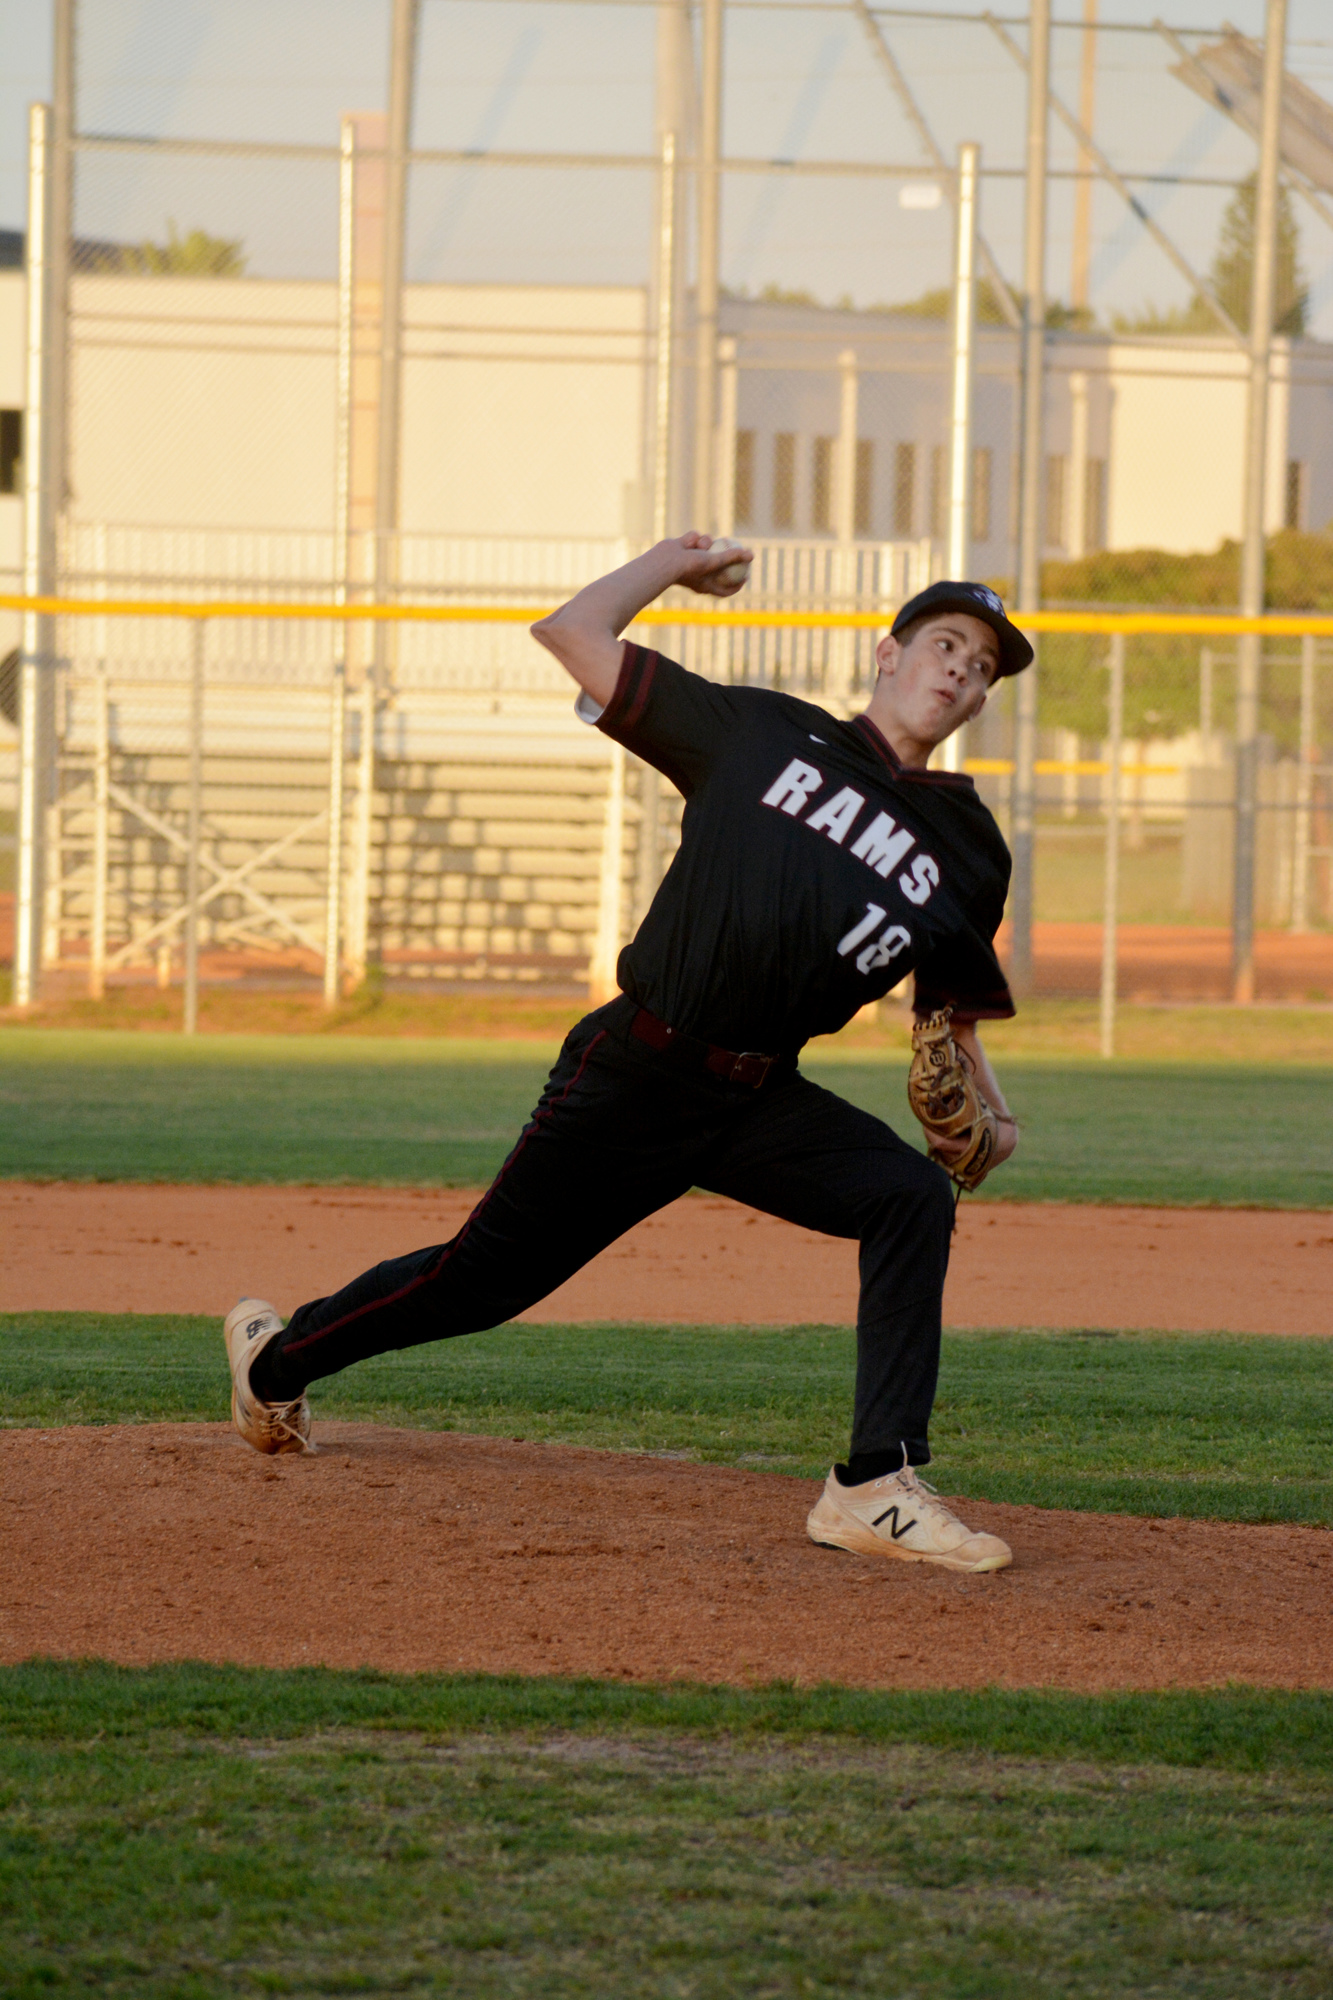 Rams junior Sam Klanot threw five scoreless innings in relief against East Lake High. Klanot will be a key member of the team's pitching staff in 2023.